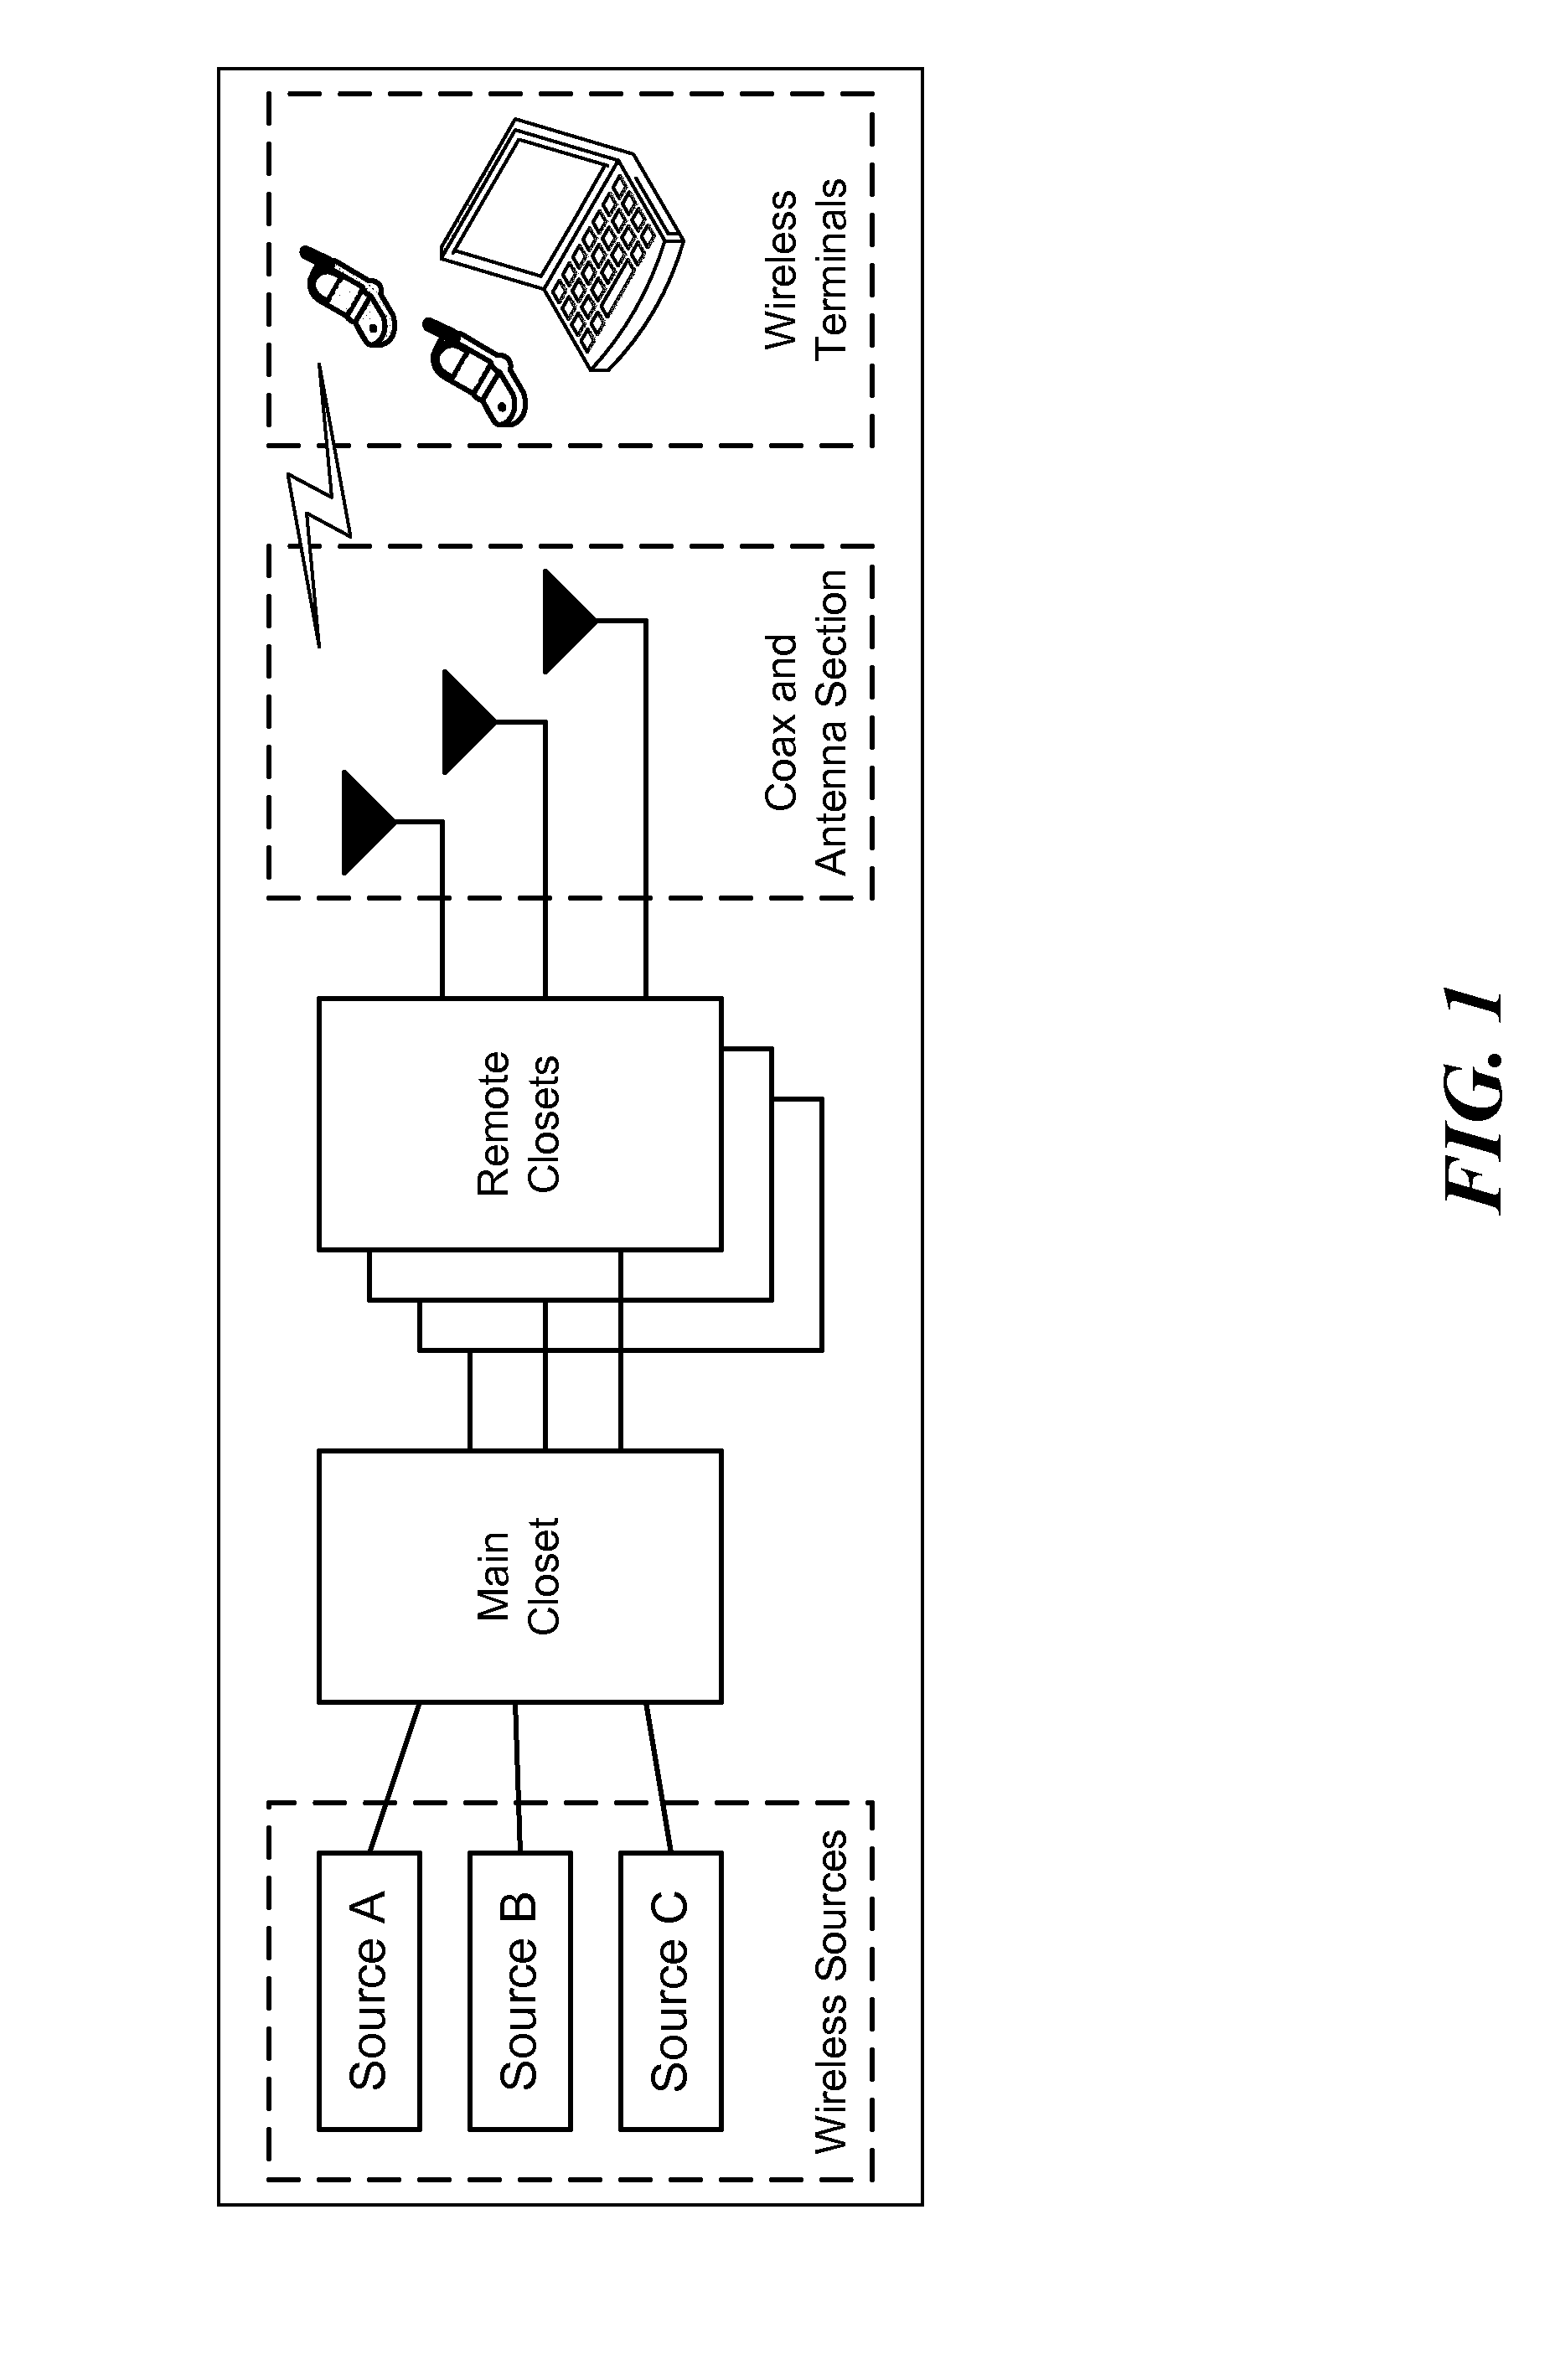 Hybrid Passive Active Broadband Antenna for a Distributed Antenna System